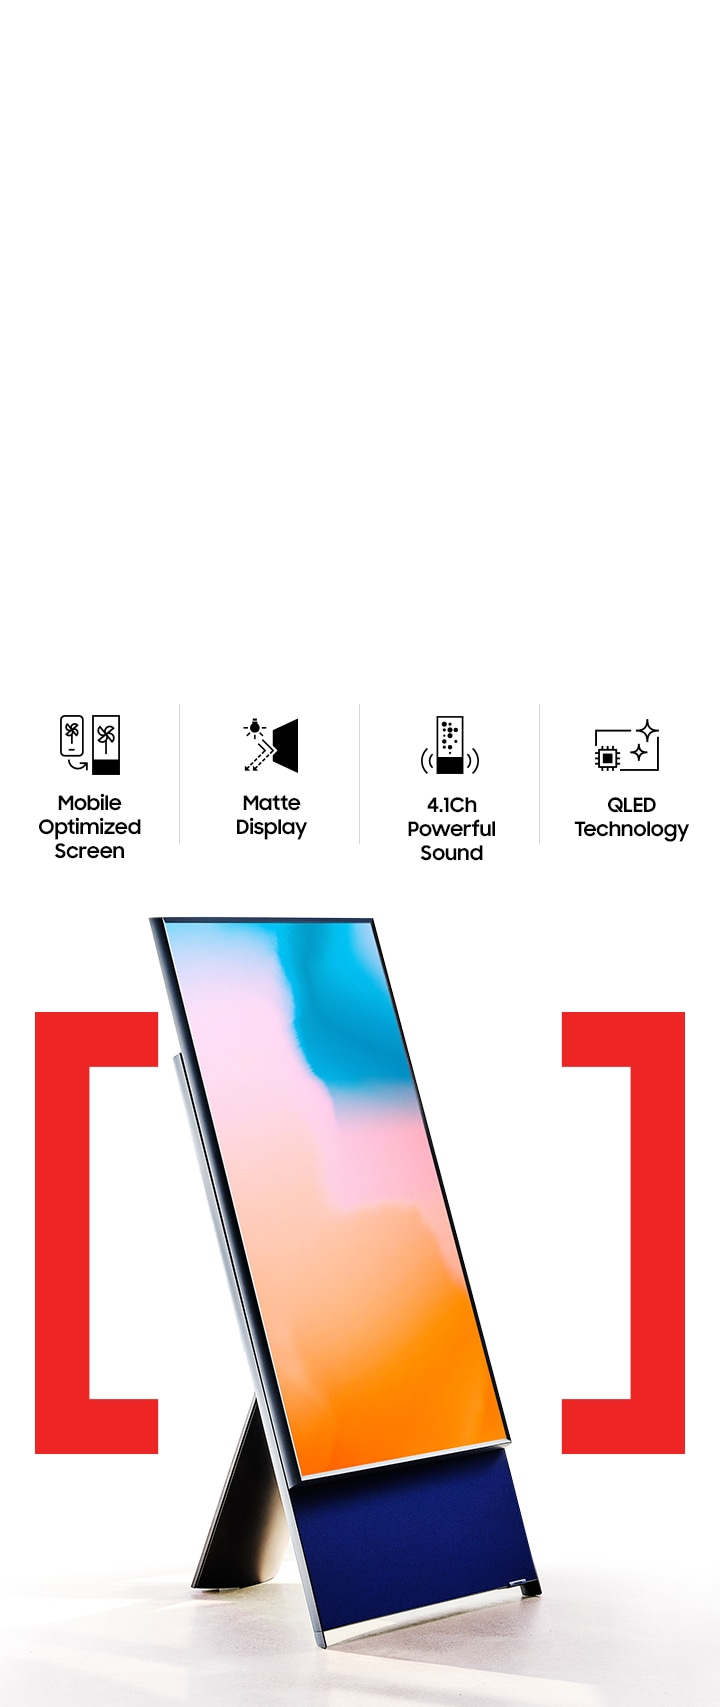 The Sero is on display in portrait mode. Its Top 4 features are introduced as Mobile Optimized Screen, Matte Display, 4.1Ch Powerful Sound and QLED Technology. 